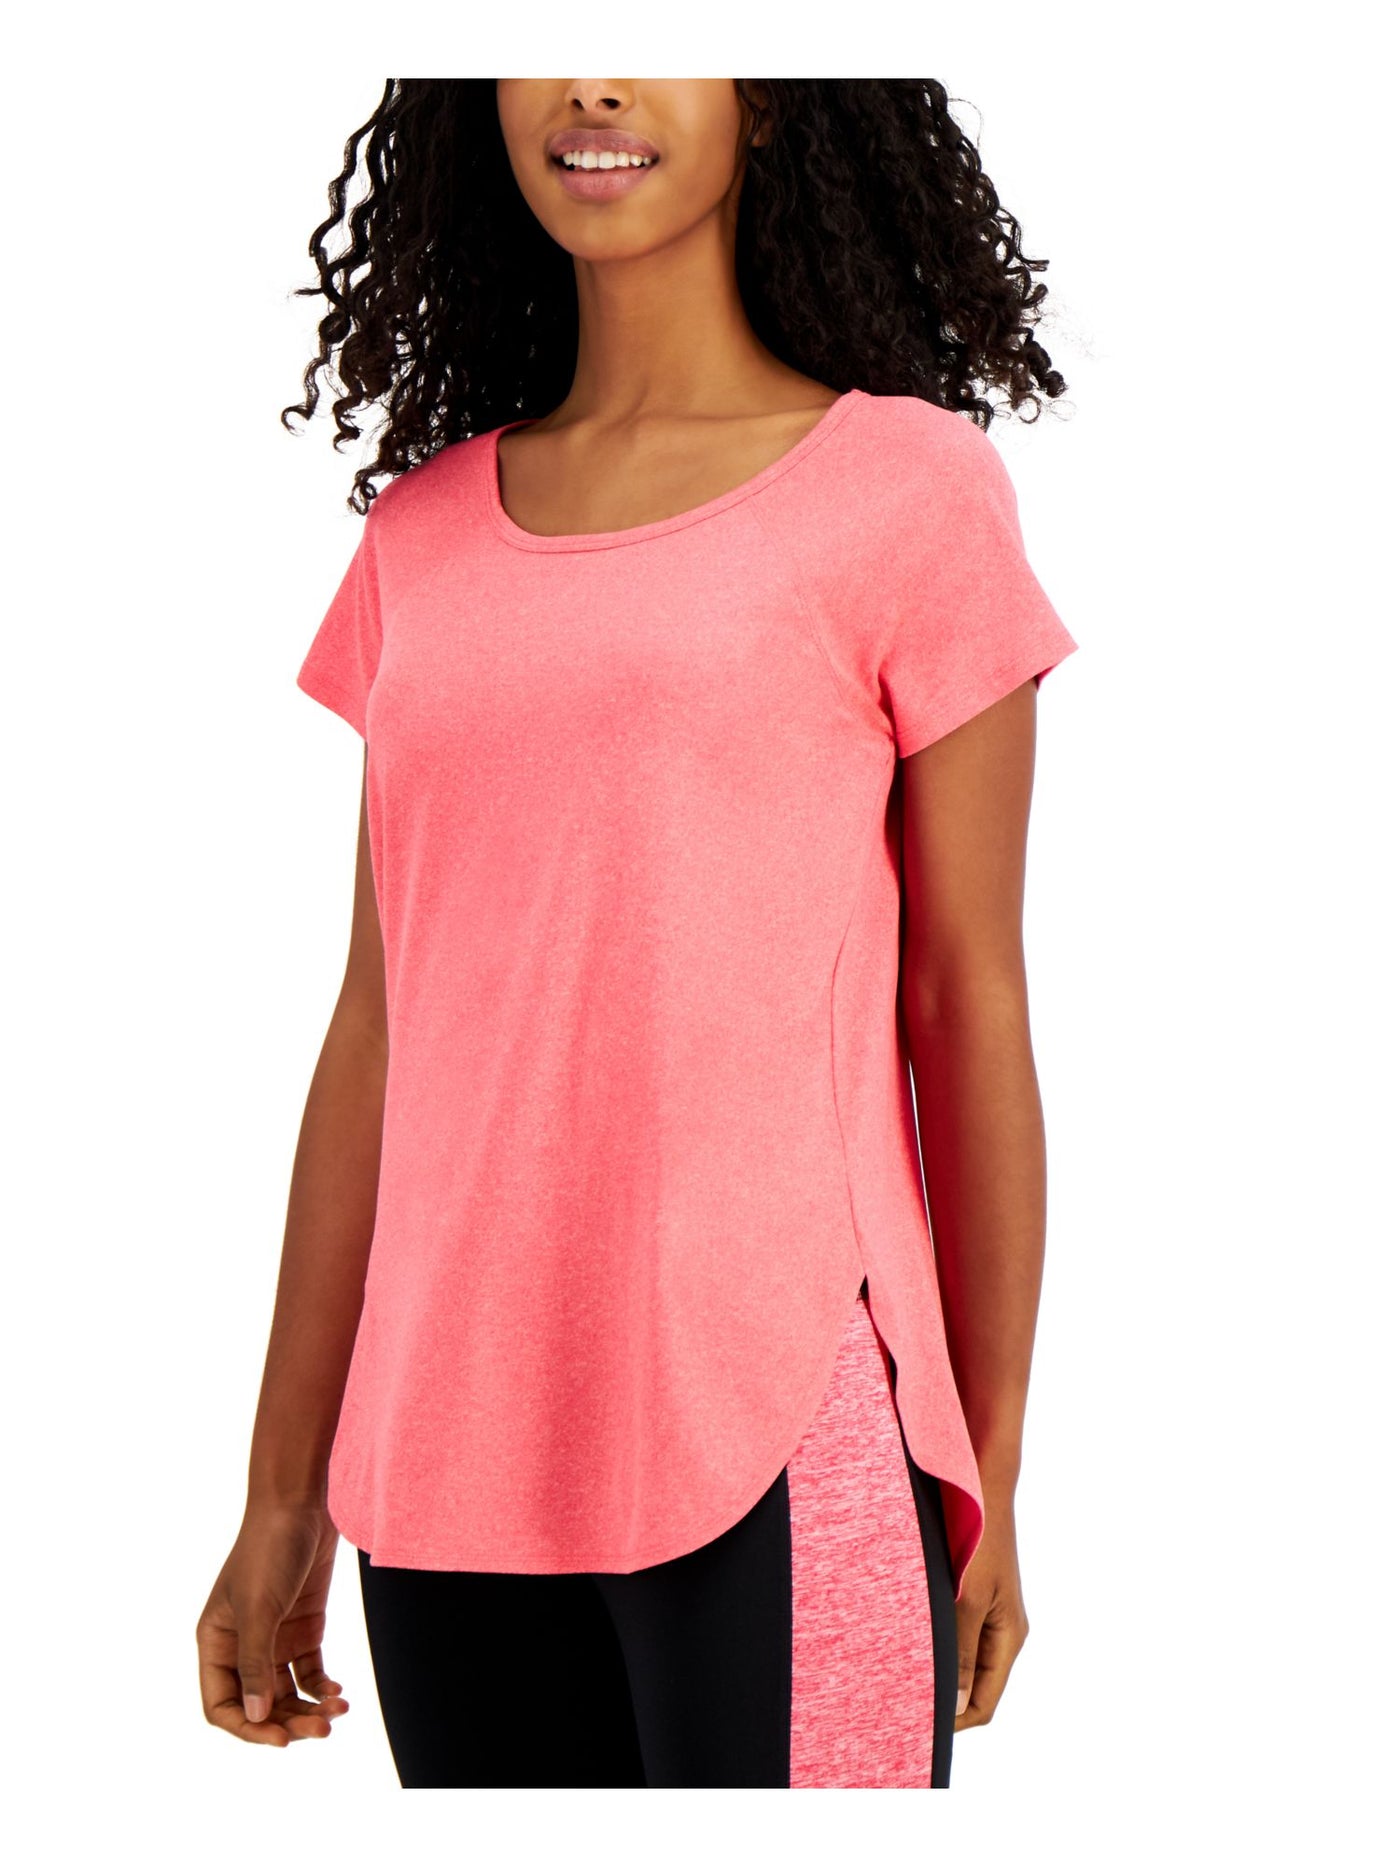 IDEOLOGY Womens Pink Stretch Heather Short Sleeve Scoop Neck Top M